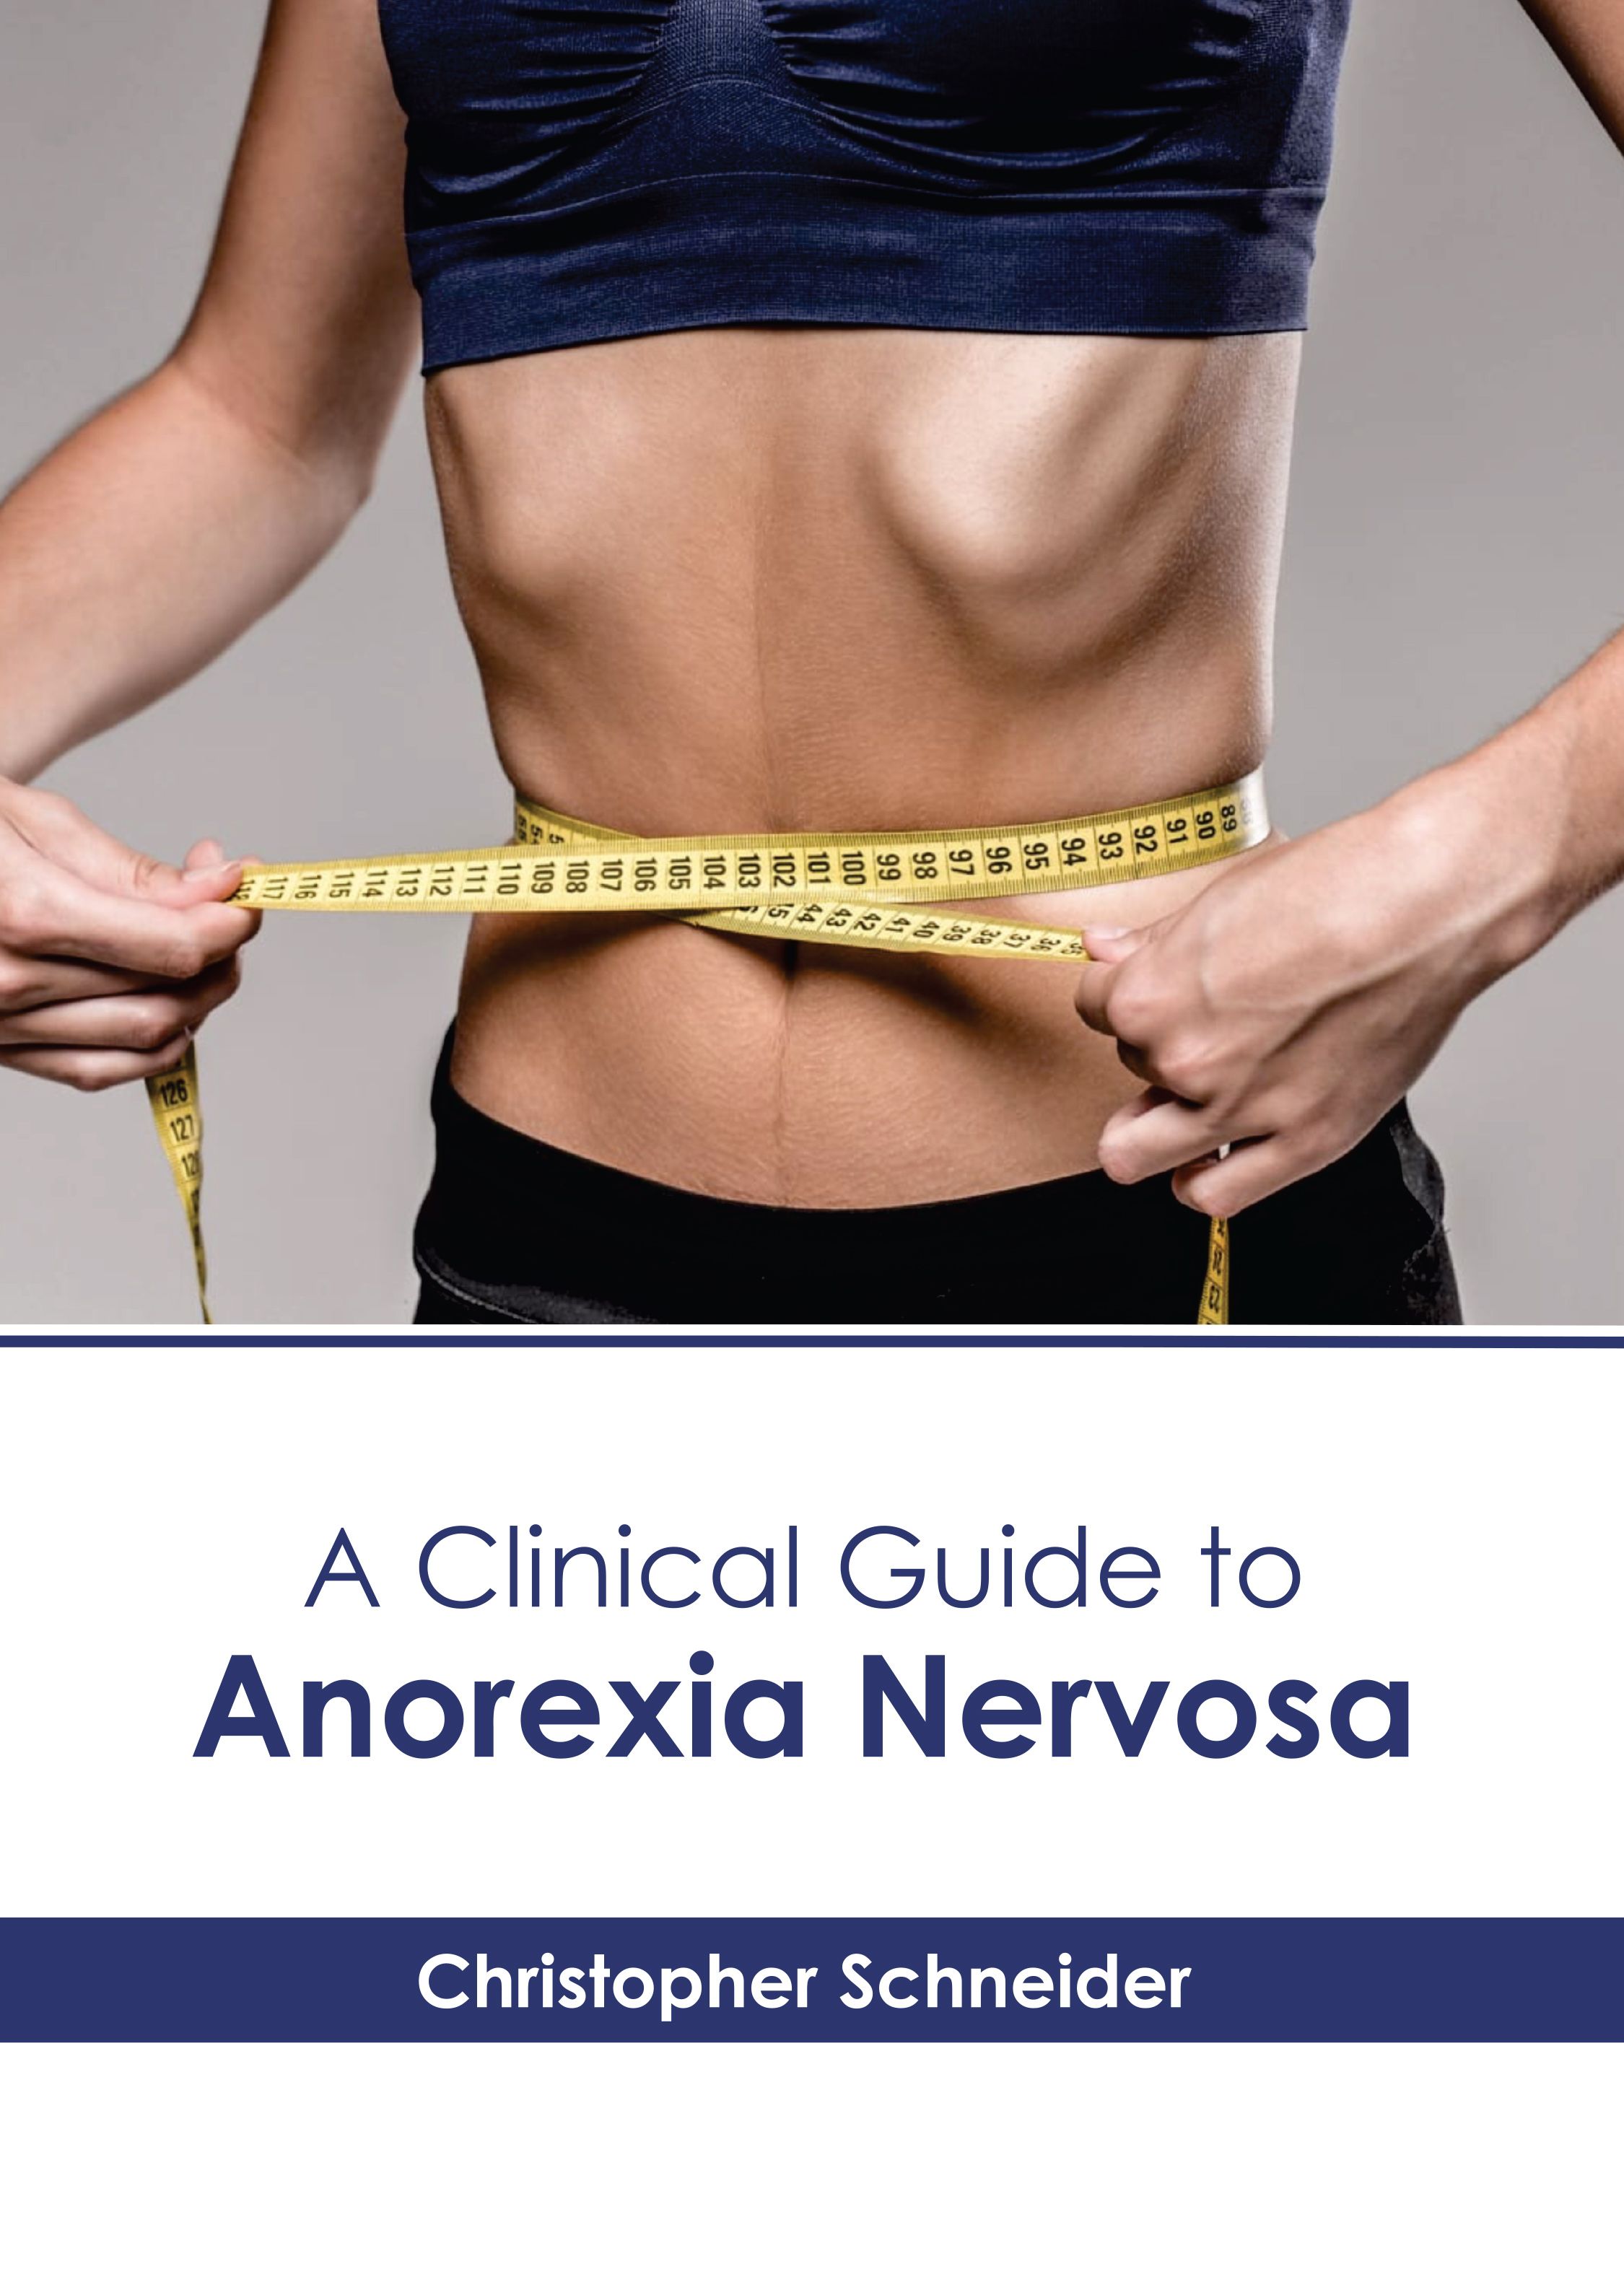 

exclusive-publishers/american-medical-publishers/a-clinical-guide-to-anorexia-nervosa-9781639278367